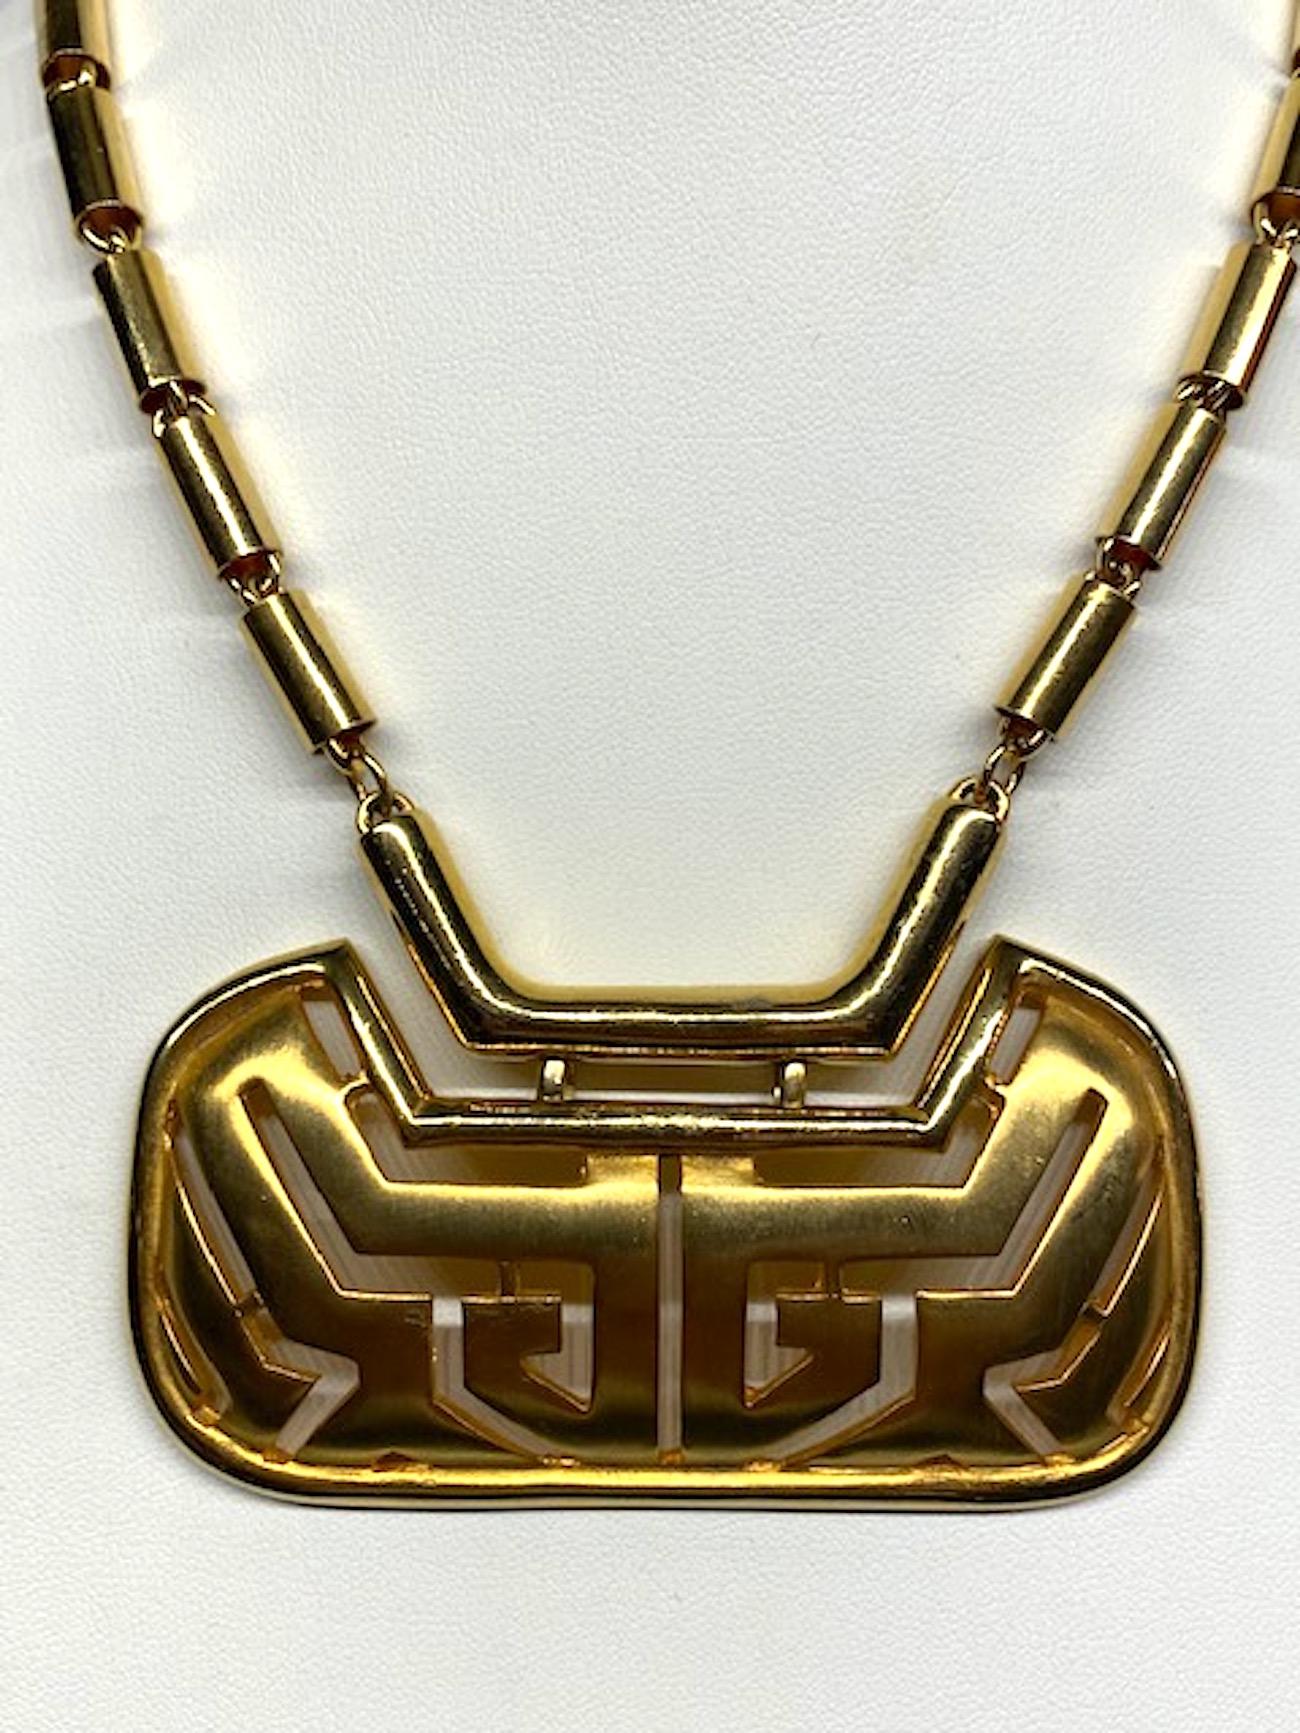 A chic late 1970s to mid 1980s shiny and satin gold abstract pendant necklace by Pierre Cardin. The right and left barrel link chains are 8 inches long. They meet in the middle at a solid 2.25 inch 